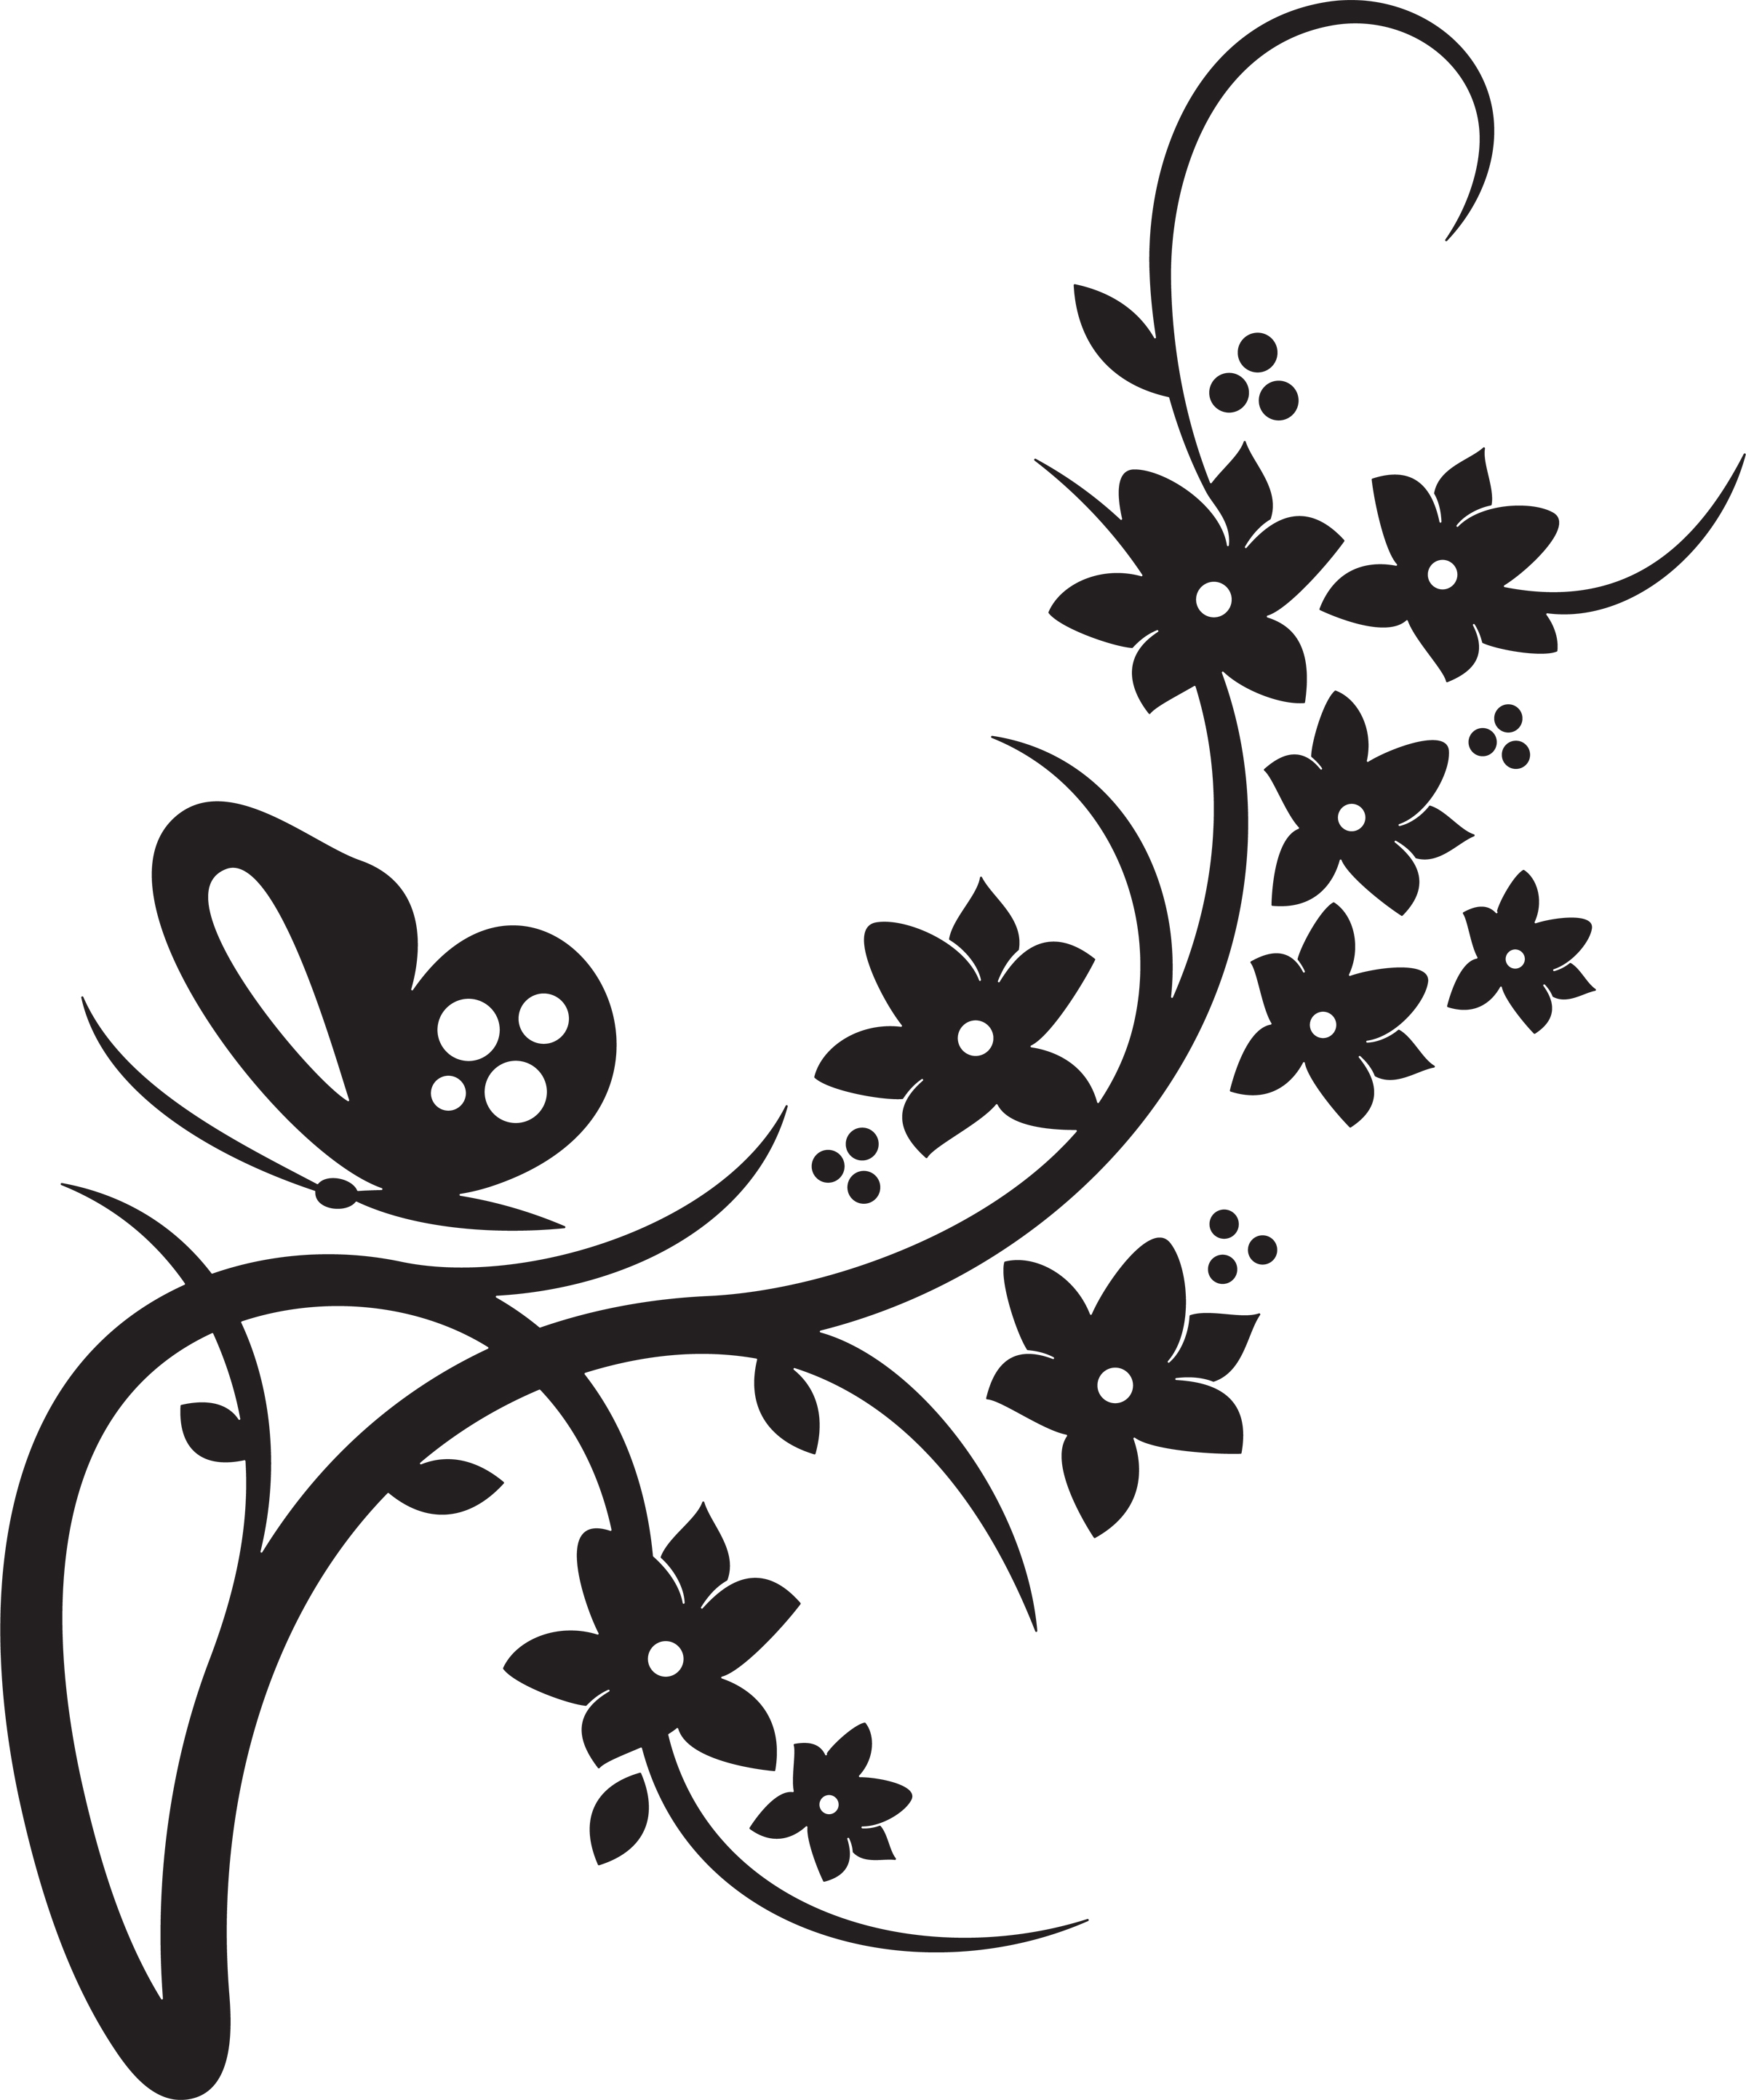 Floral Flowers And Butterflies Border Hd Photo Clipart